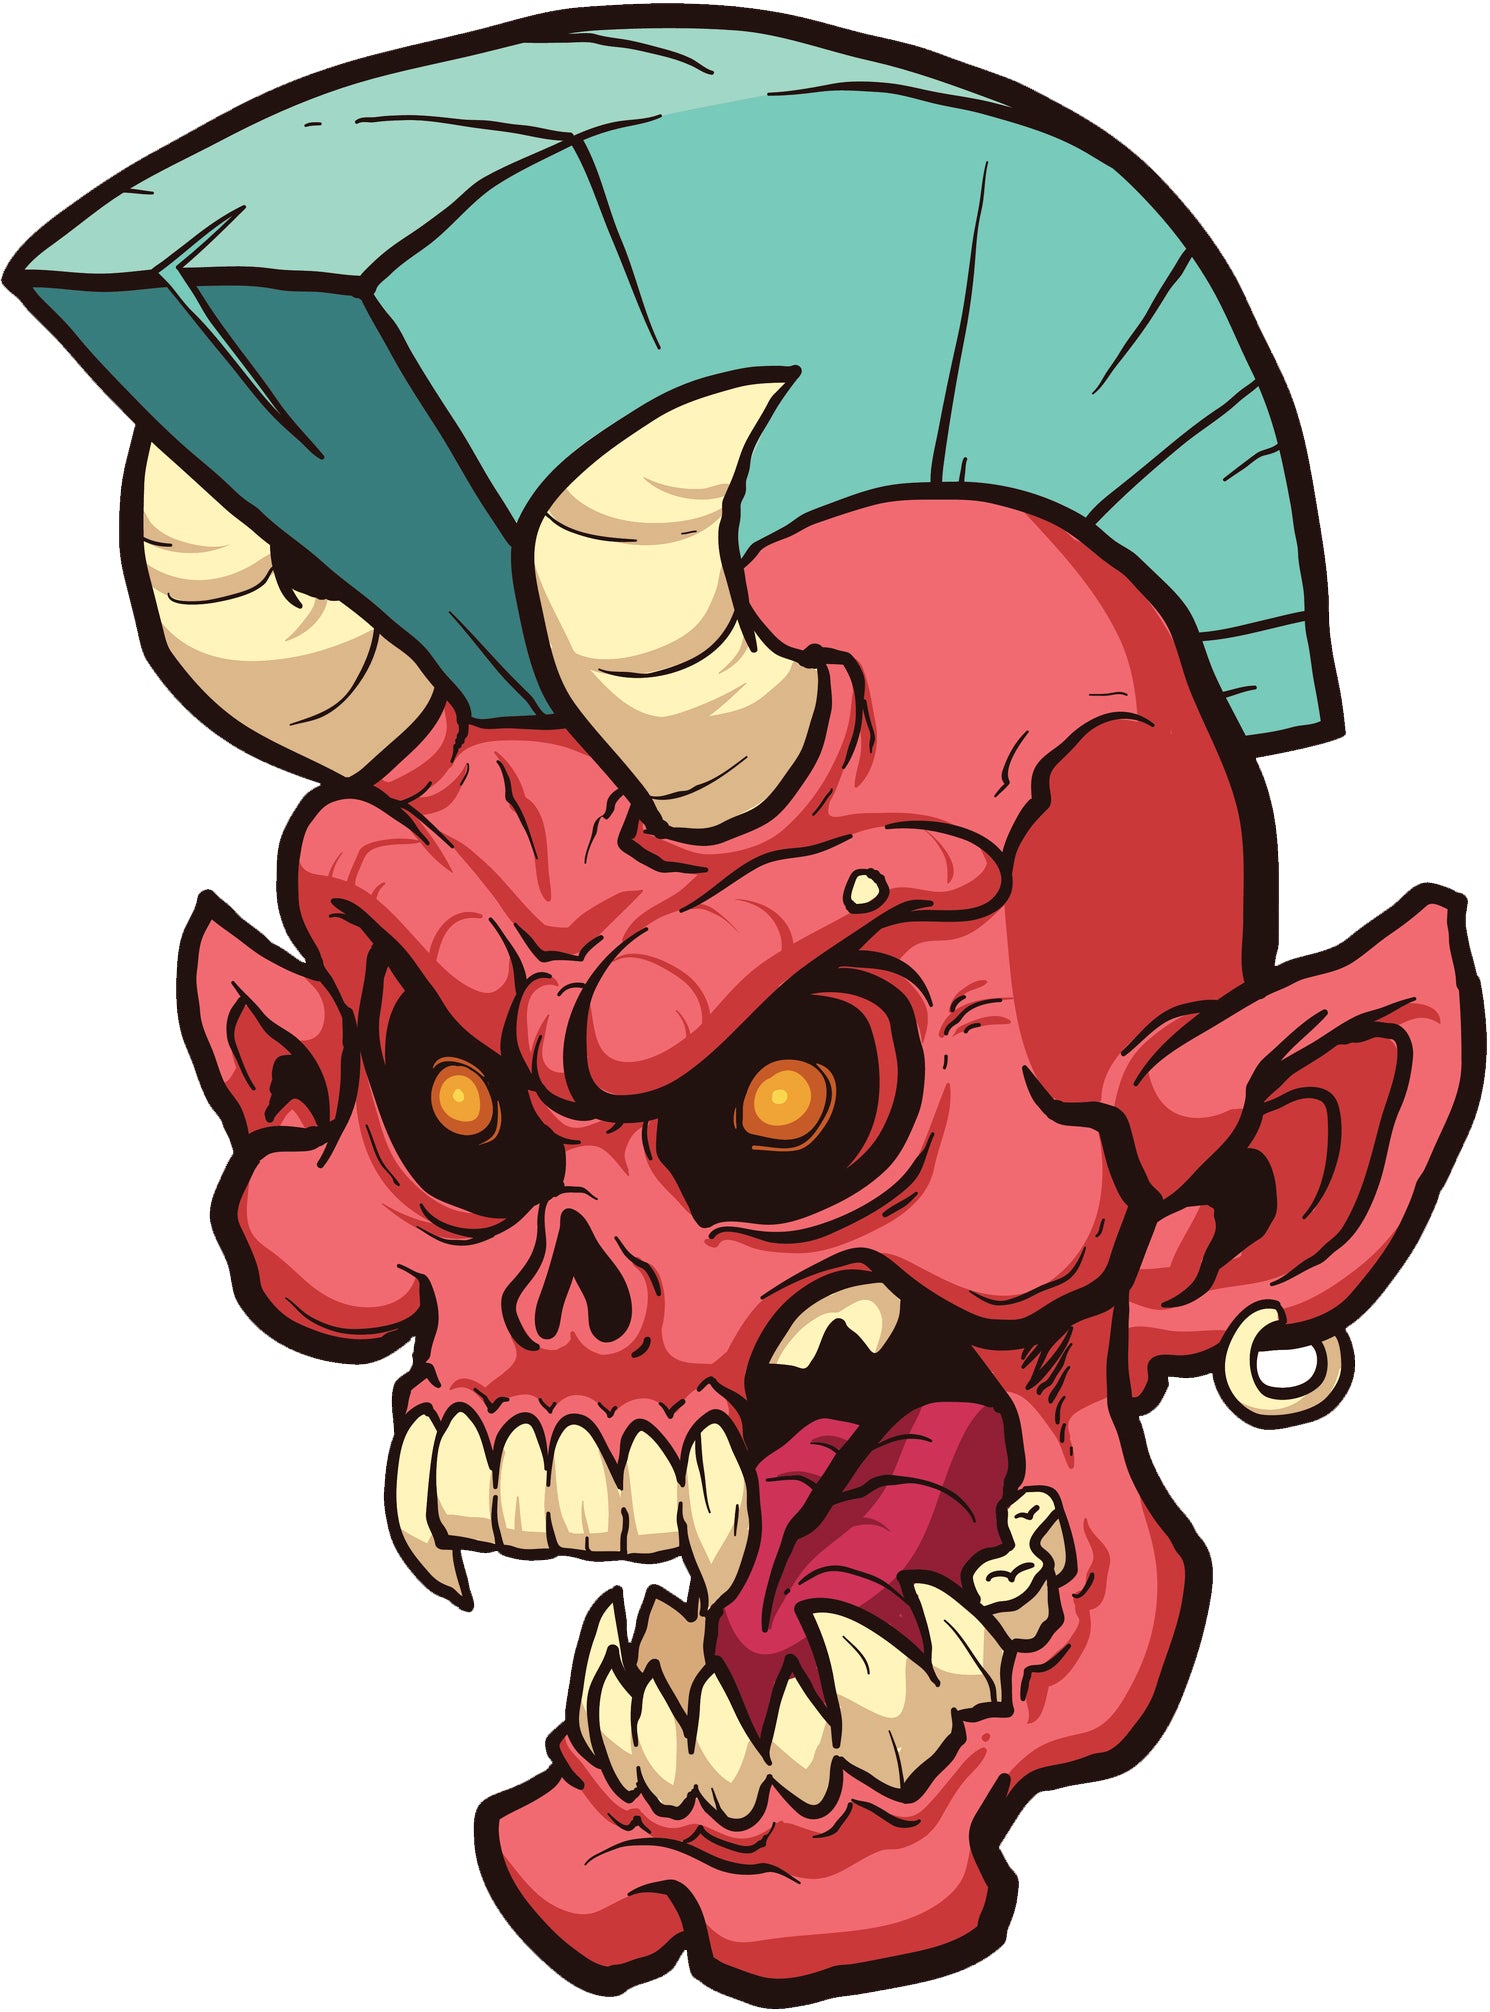 Creepy Red Devil Skull with Teal Mowhawk Vinyl Decal Sticker